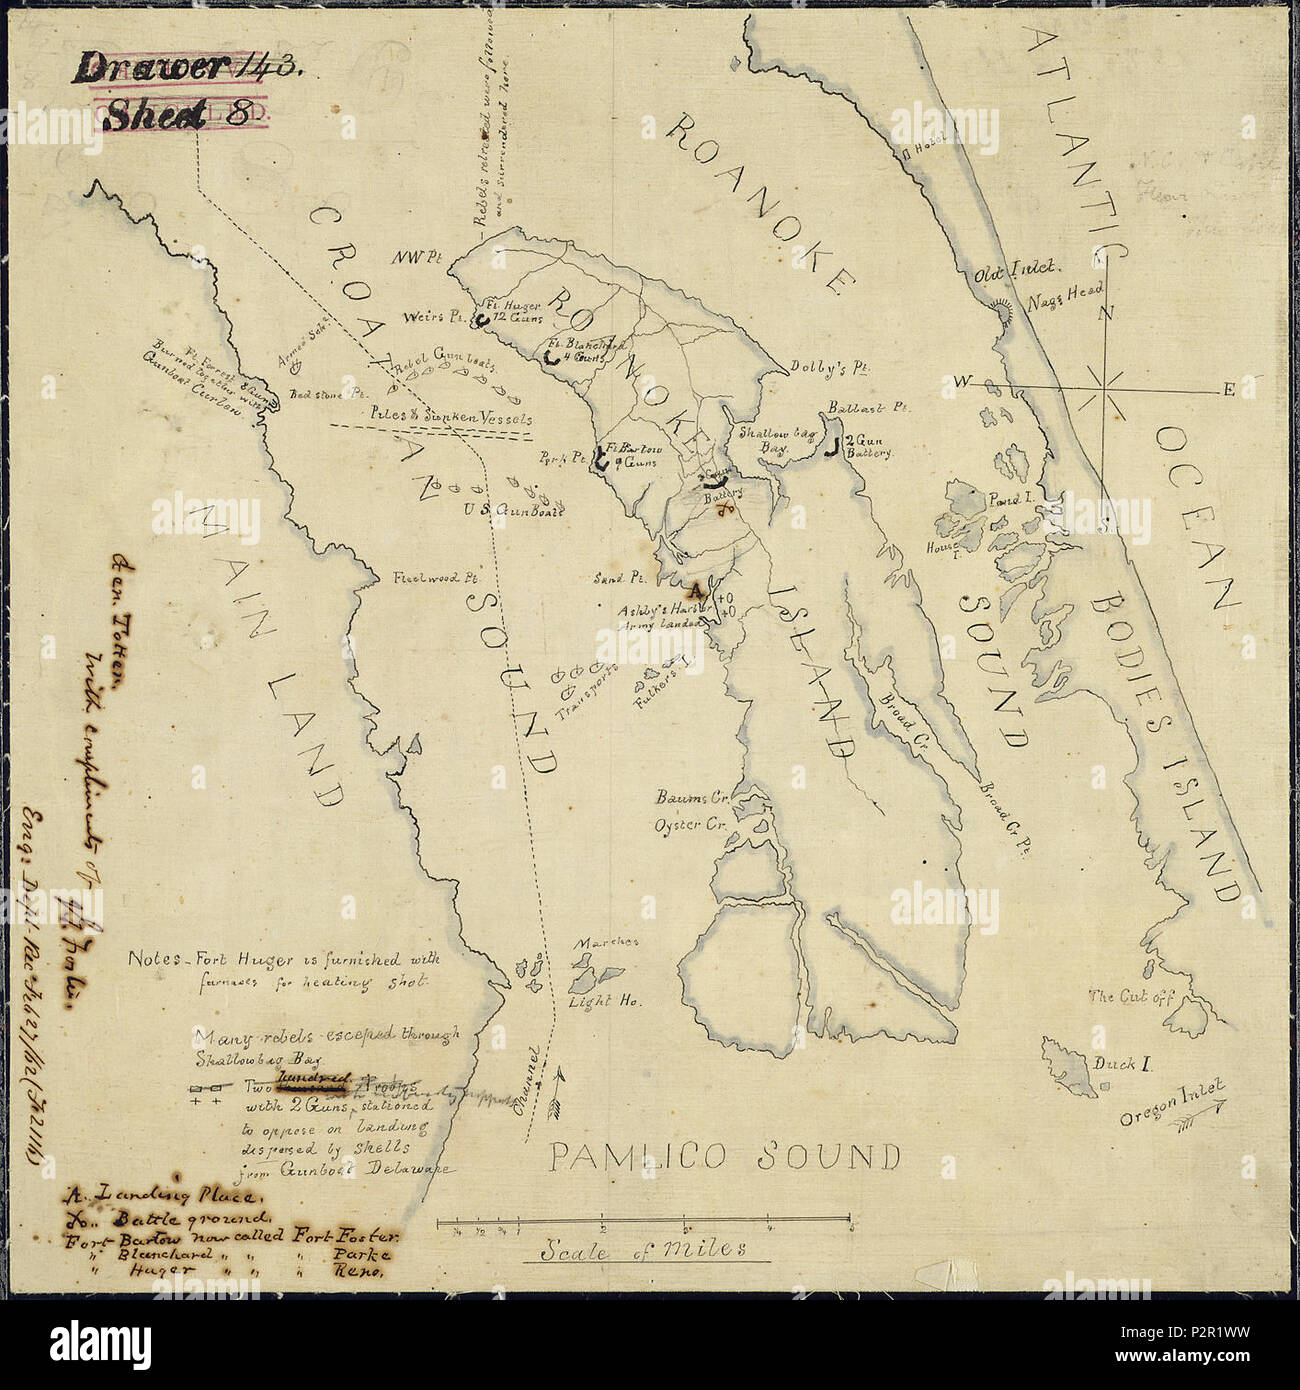 (Sketch of the action at Roanoke Island, N. C., February 8, 1862, showing Confederate defenses, positions of Federal... - Stock Photo